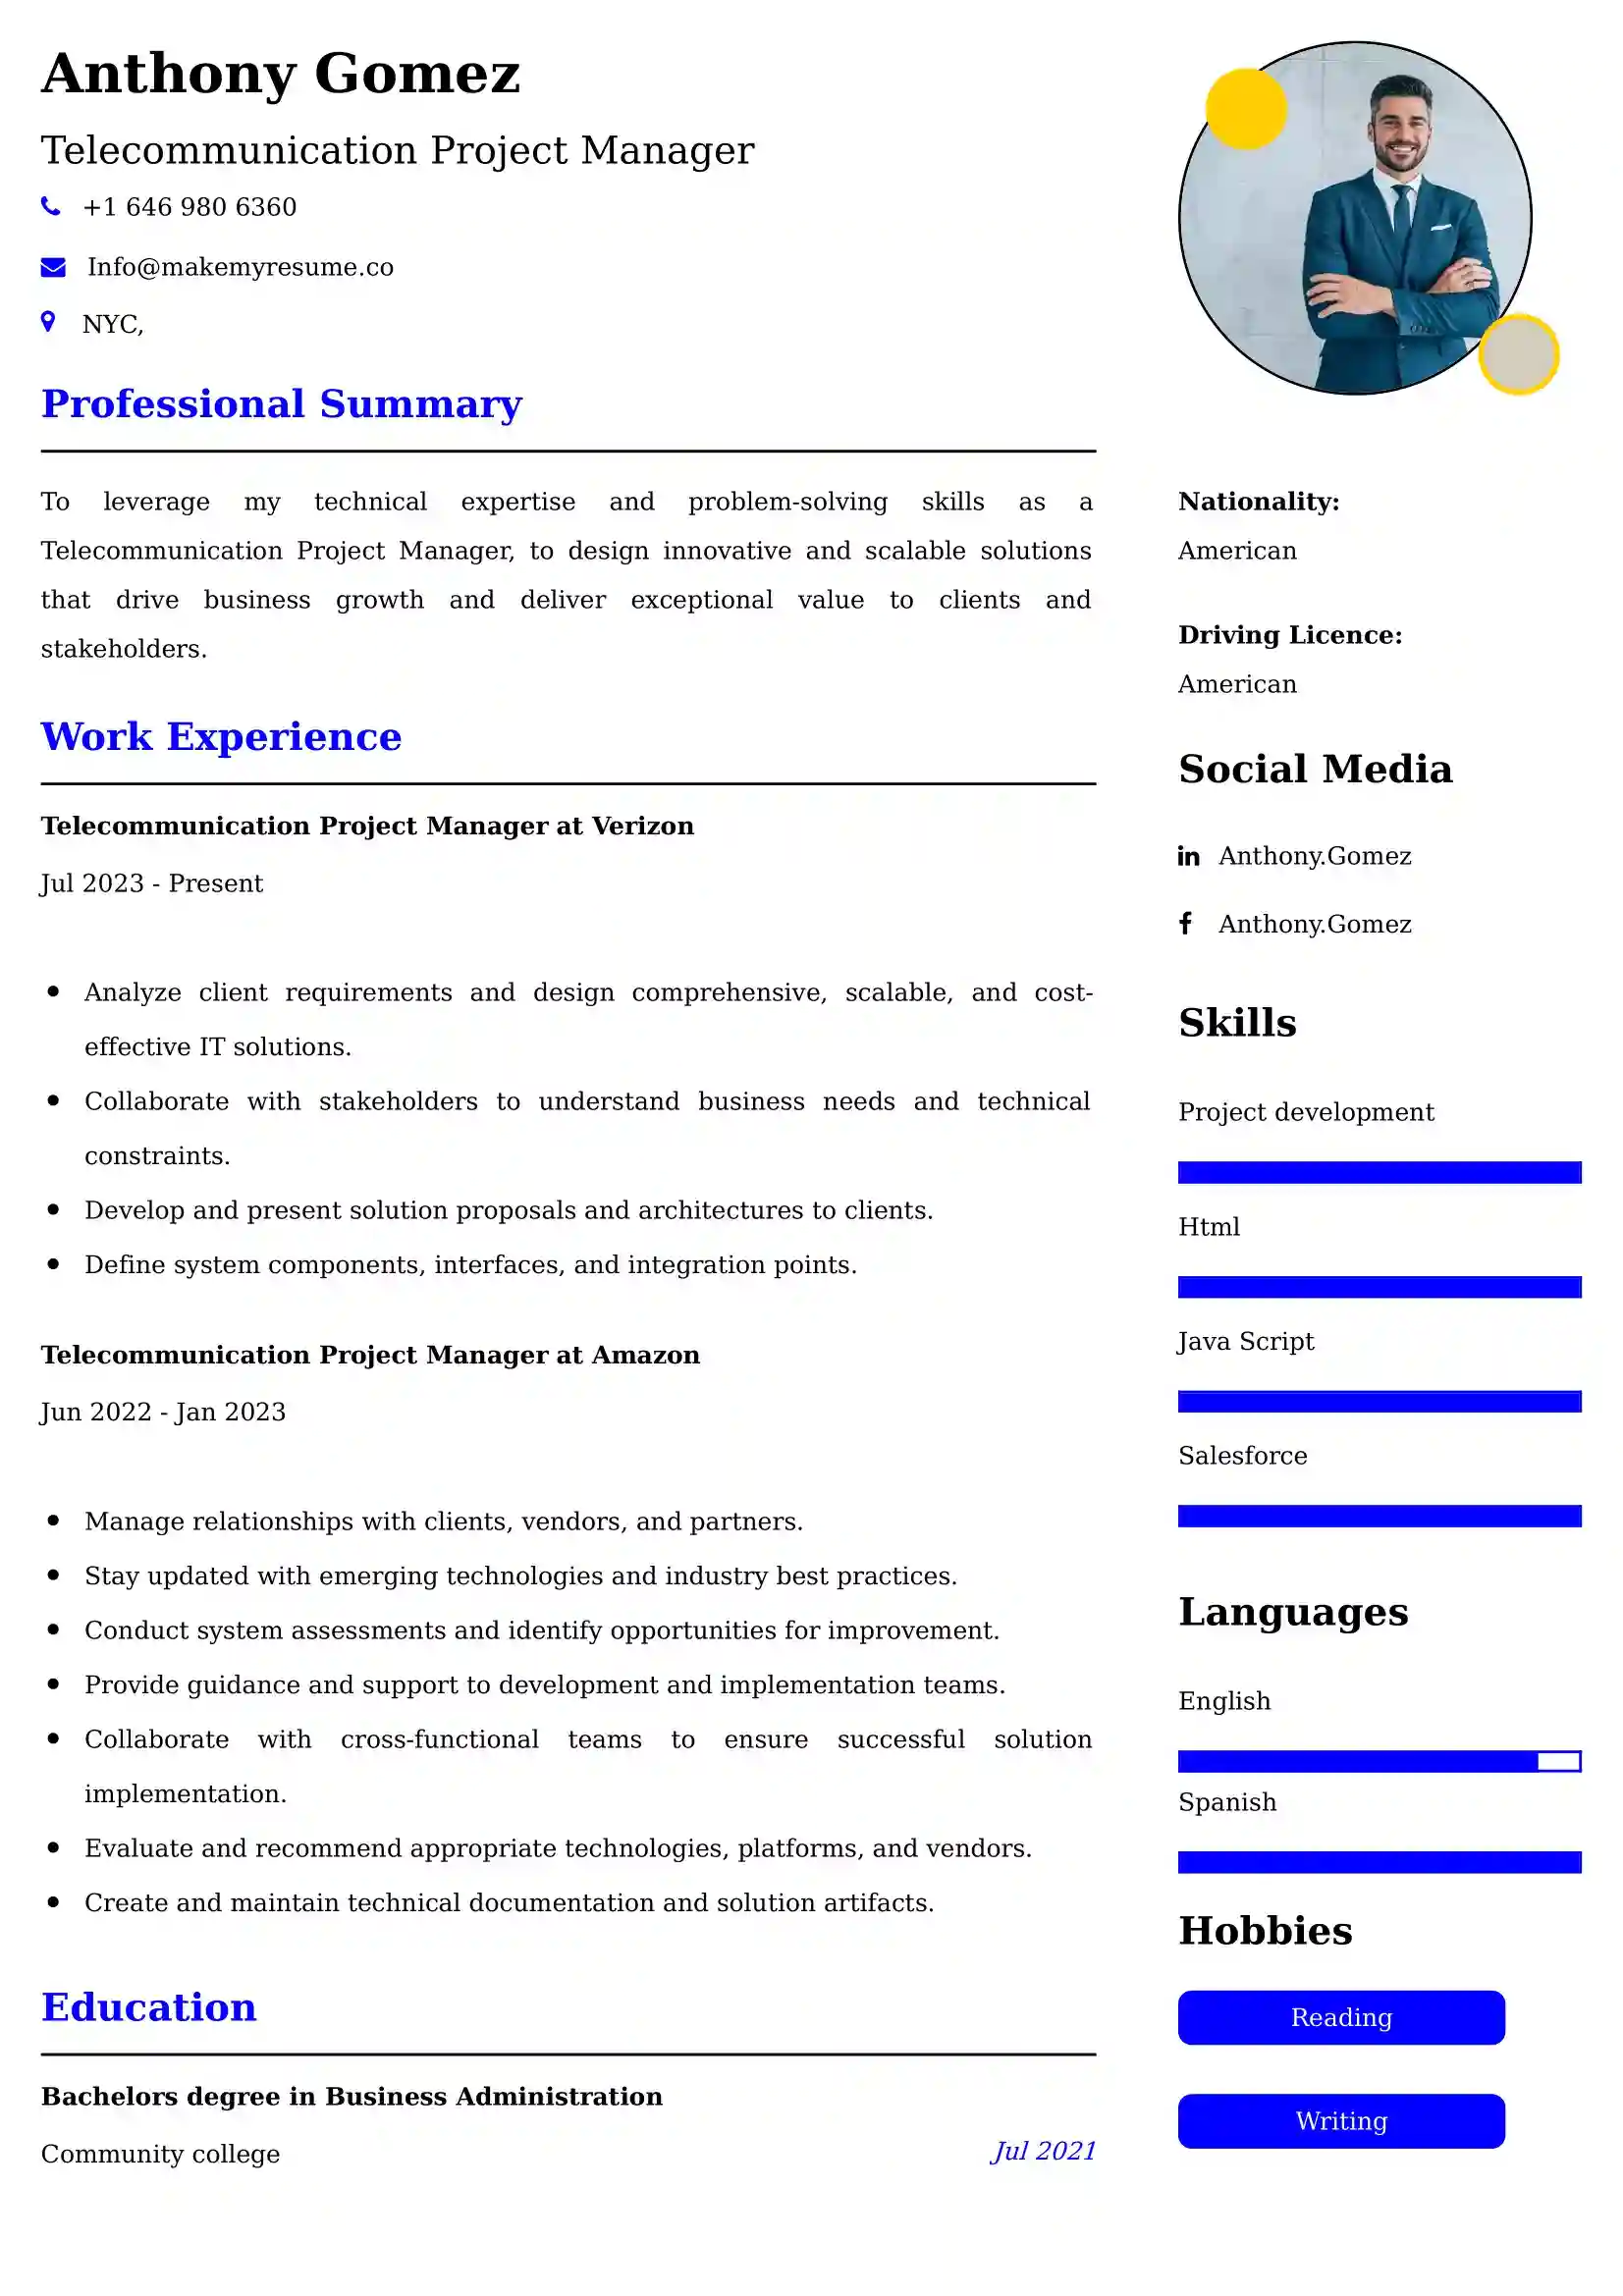 Telecommunication Project Manager Resume Examples - Brazilian Format, Latest Template